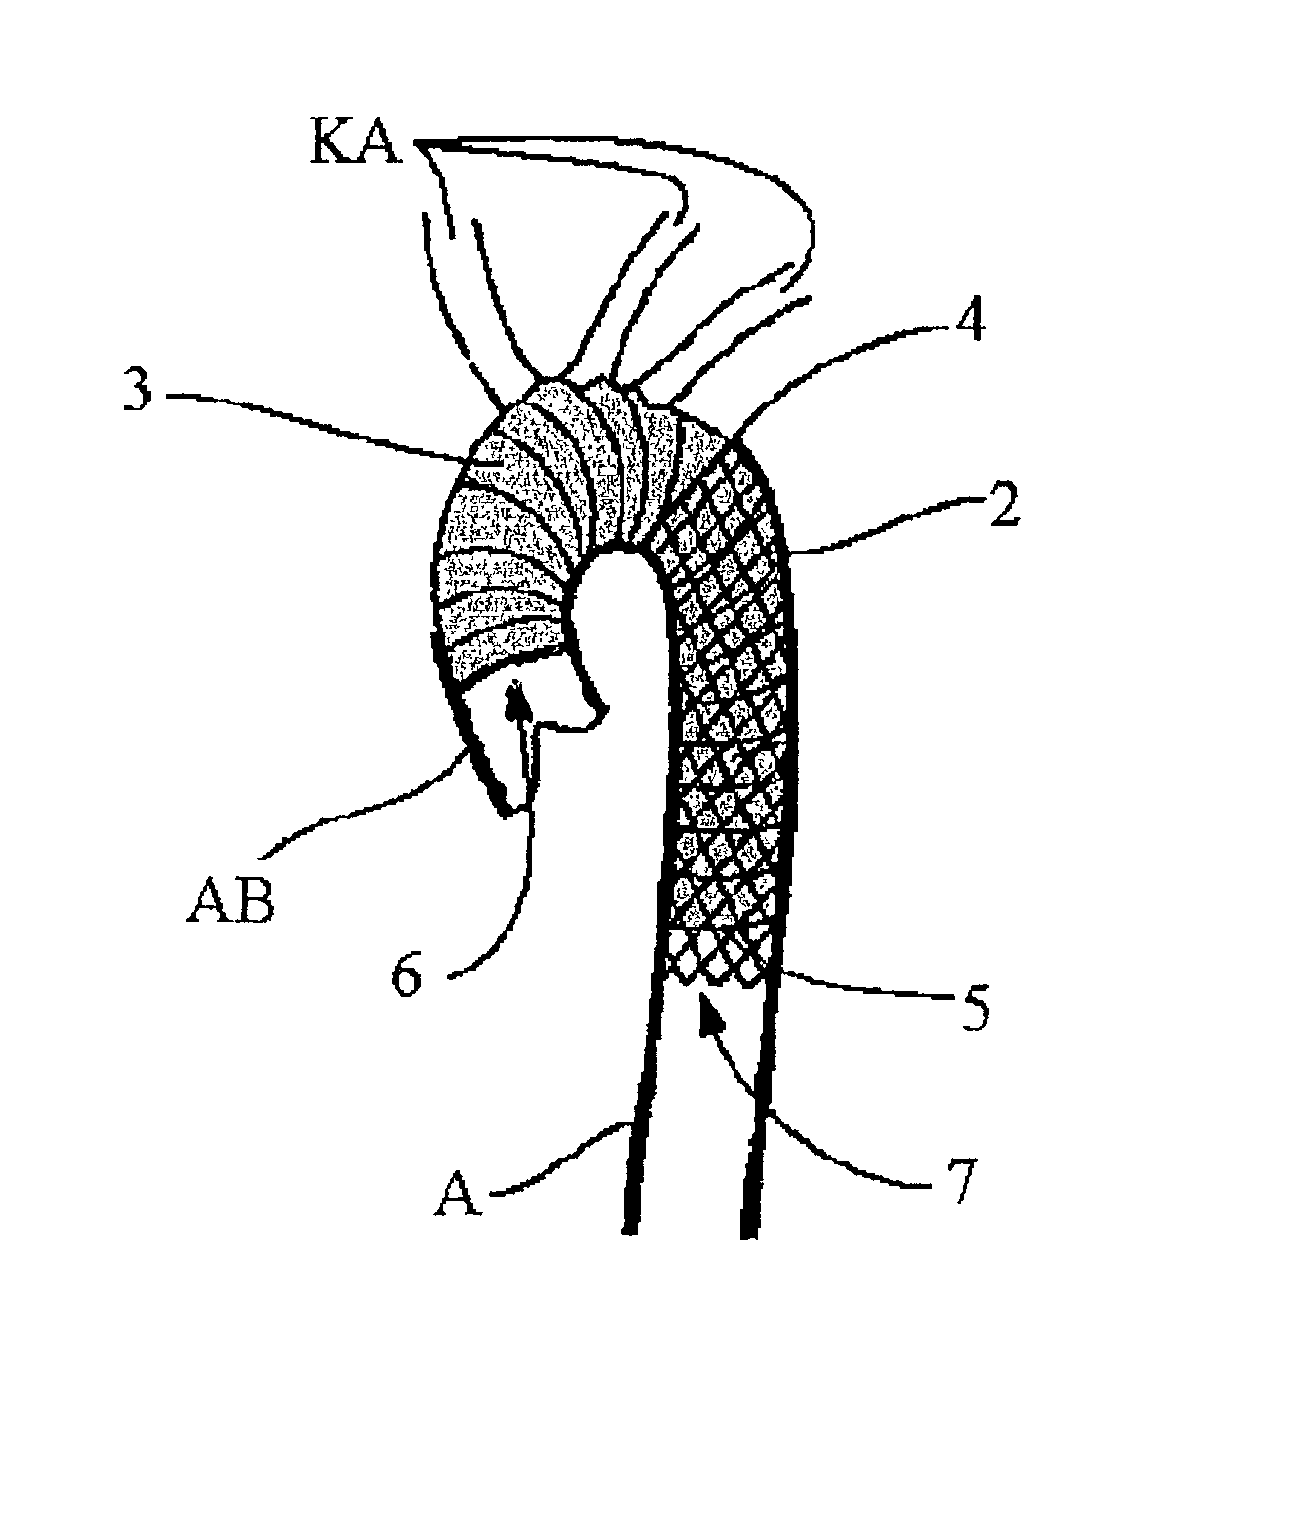 Implantation device for an aorta in an aortic arch